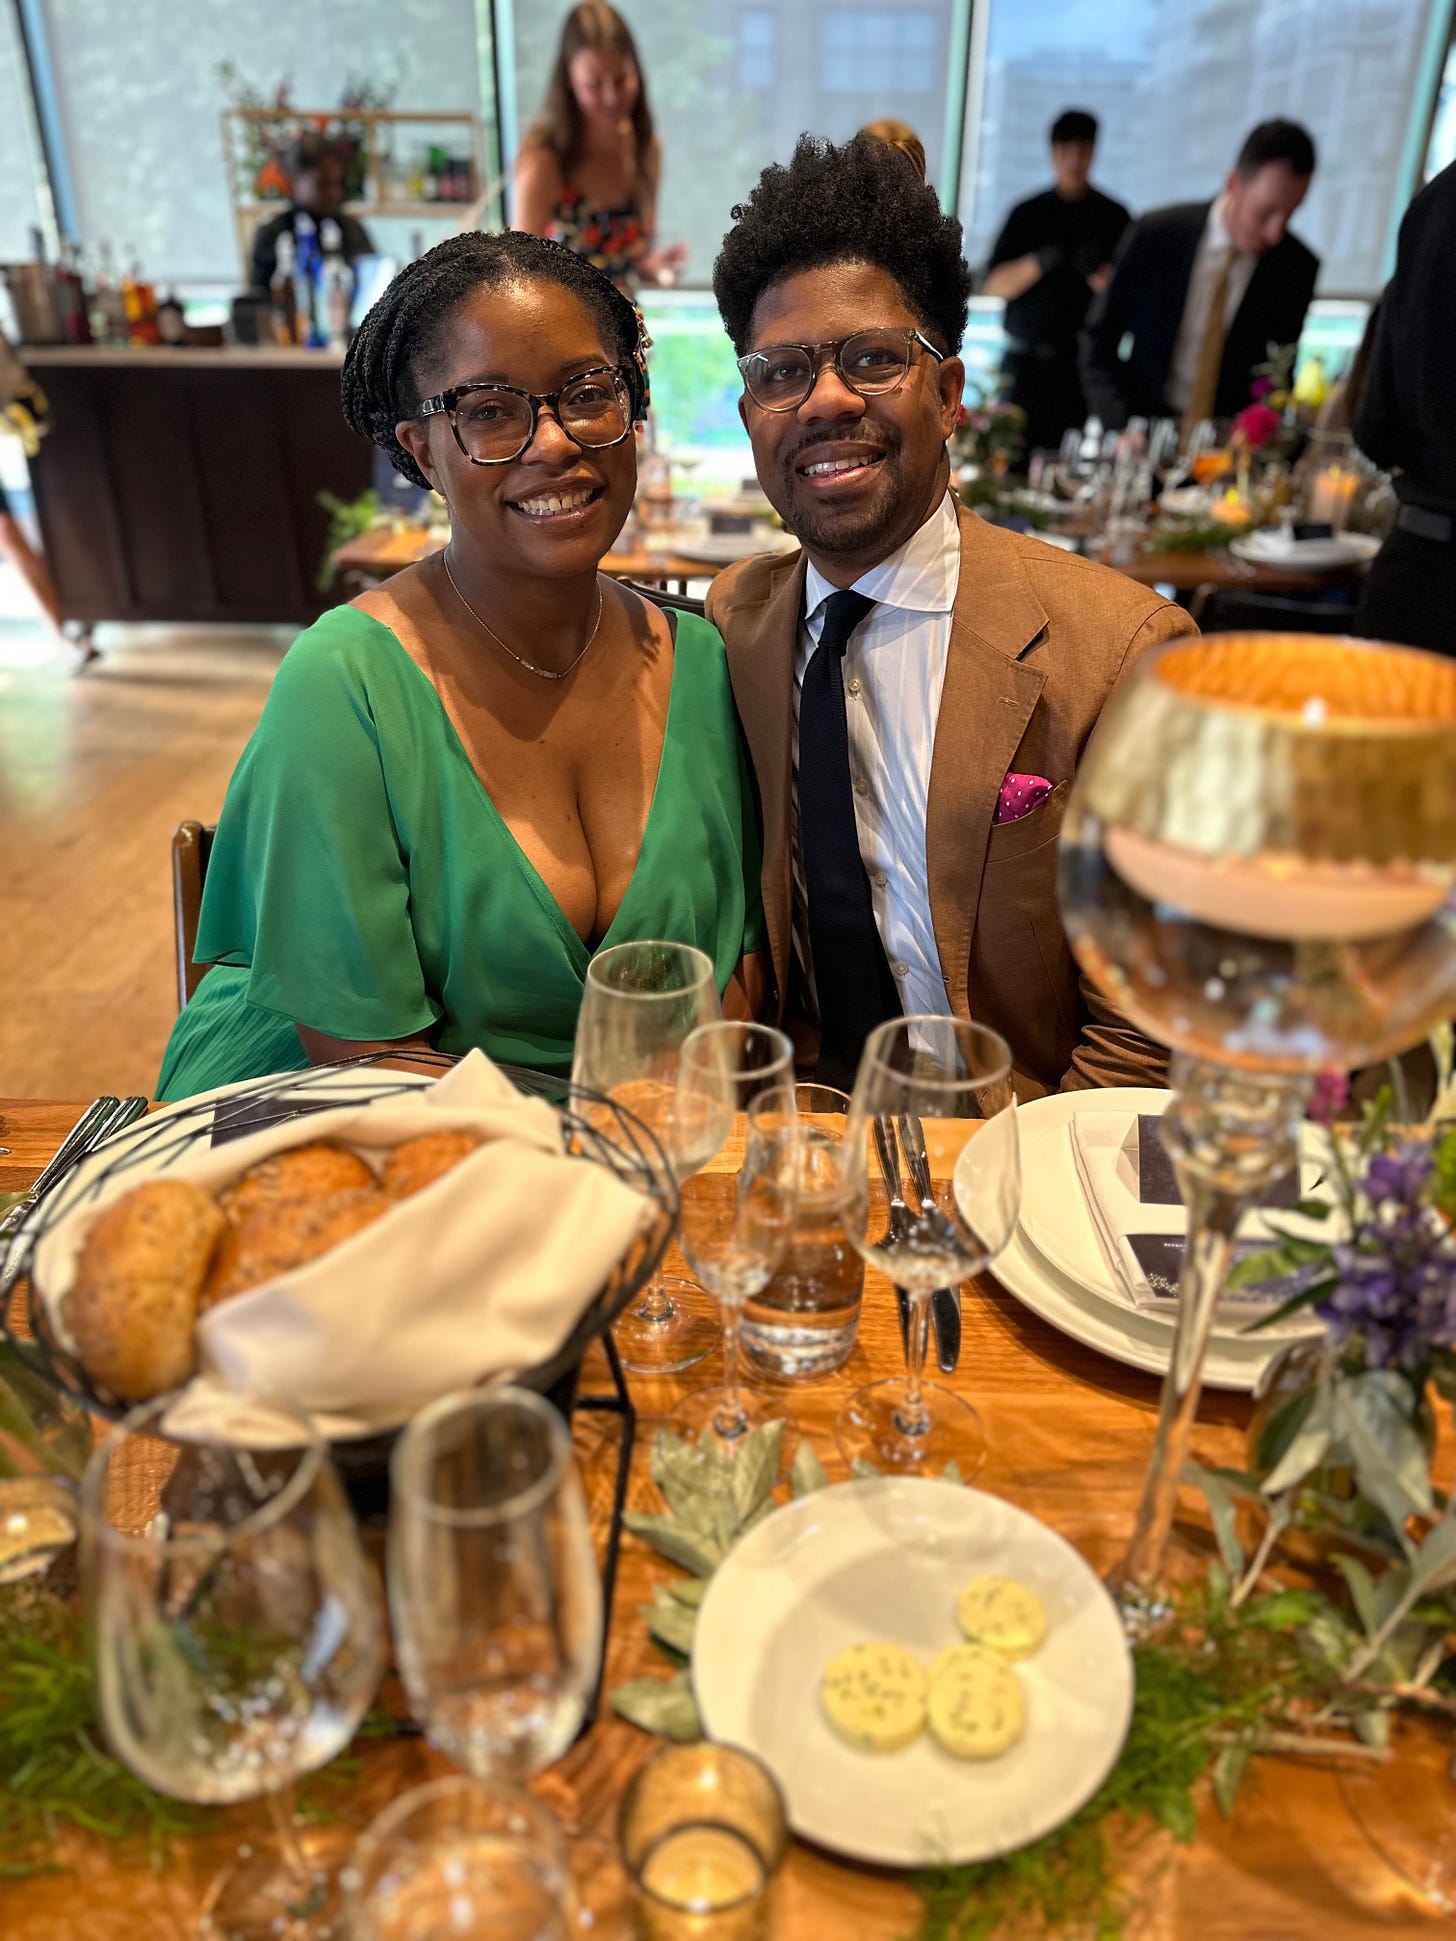 Picture of Black woman wearing a green dress and Black man wearing a brown suit at a wedding reception.